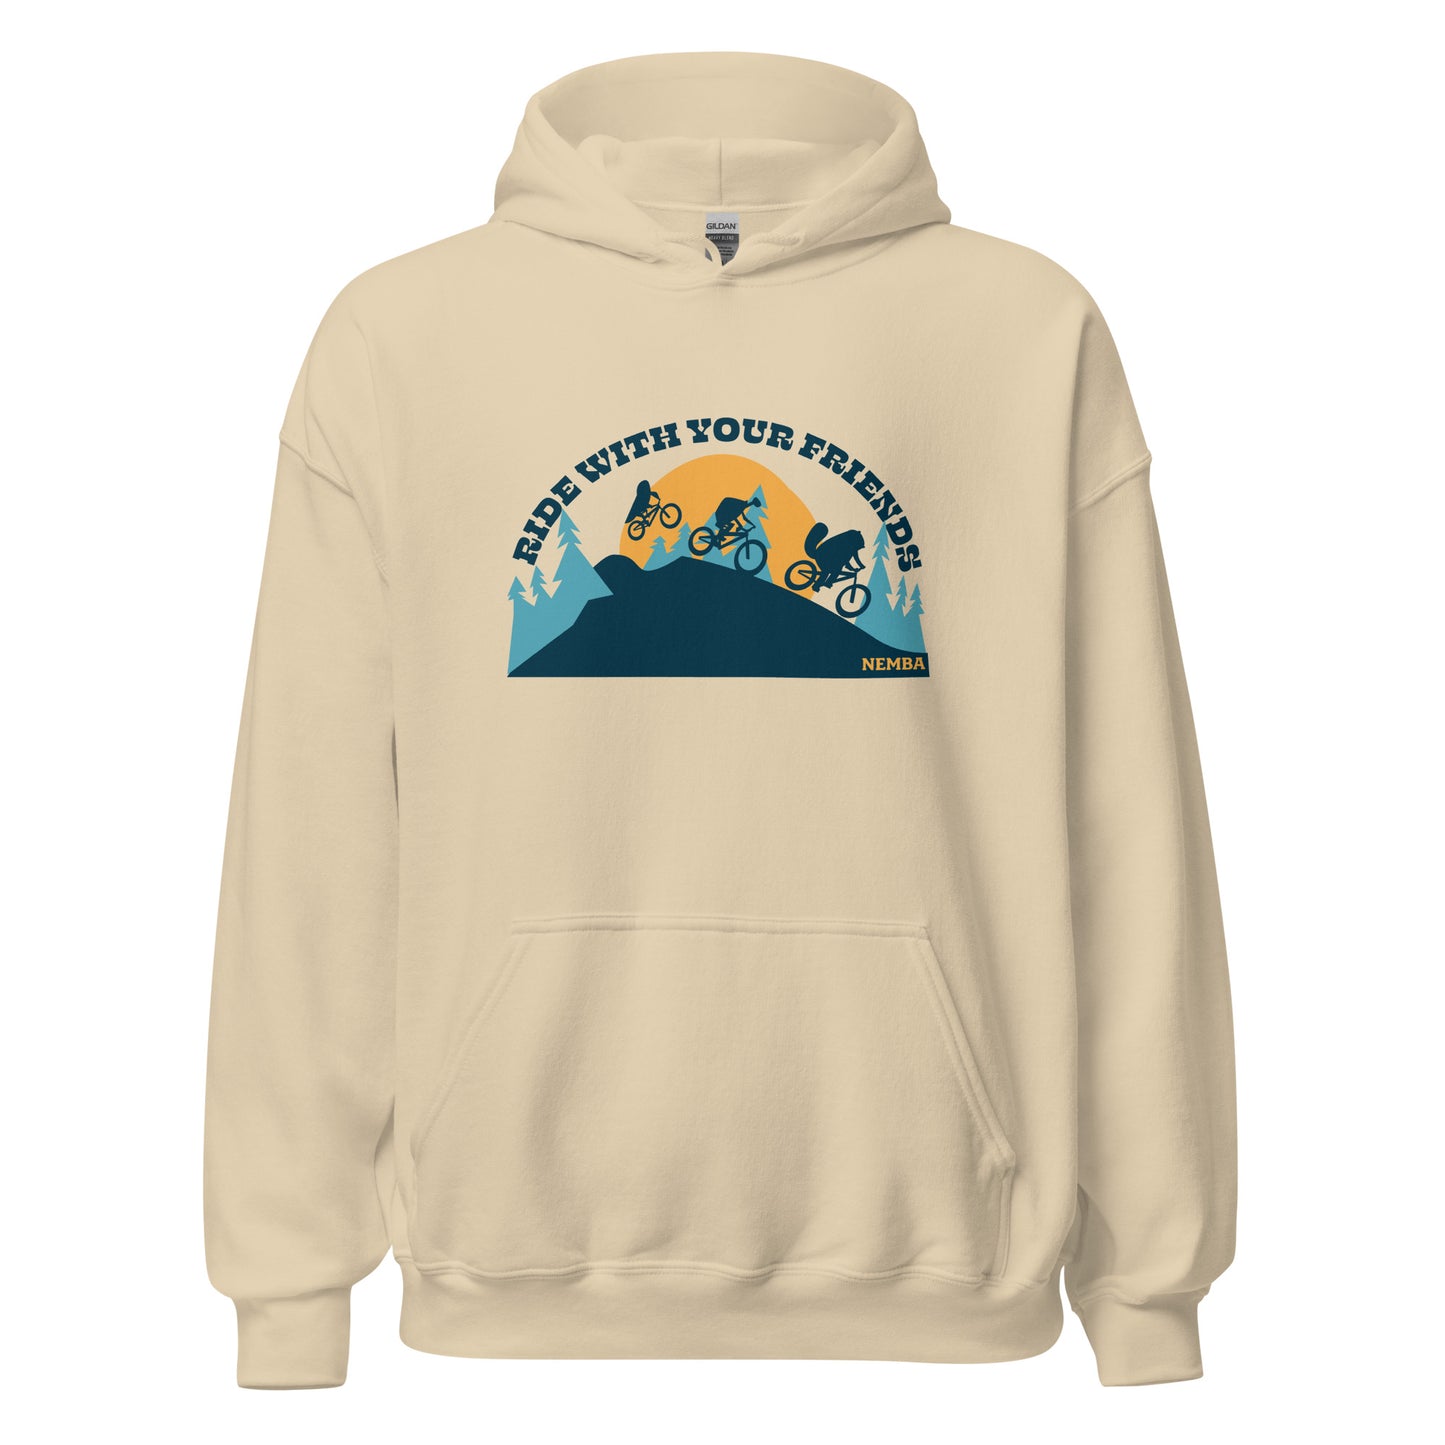 Unisex Hoodie, Ride With Your Friends